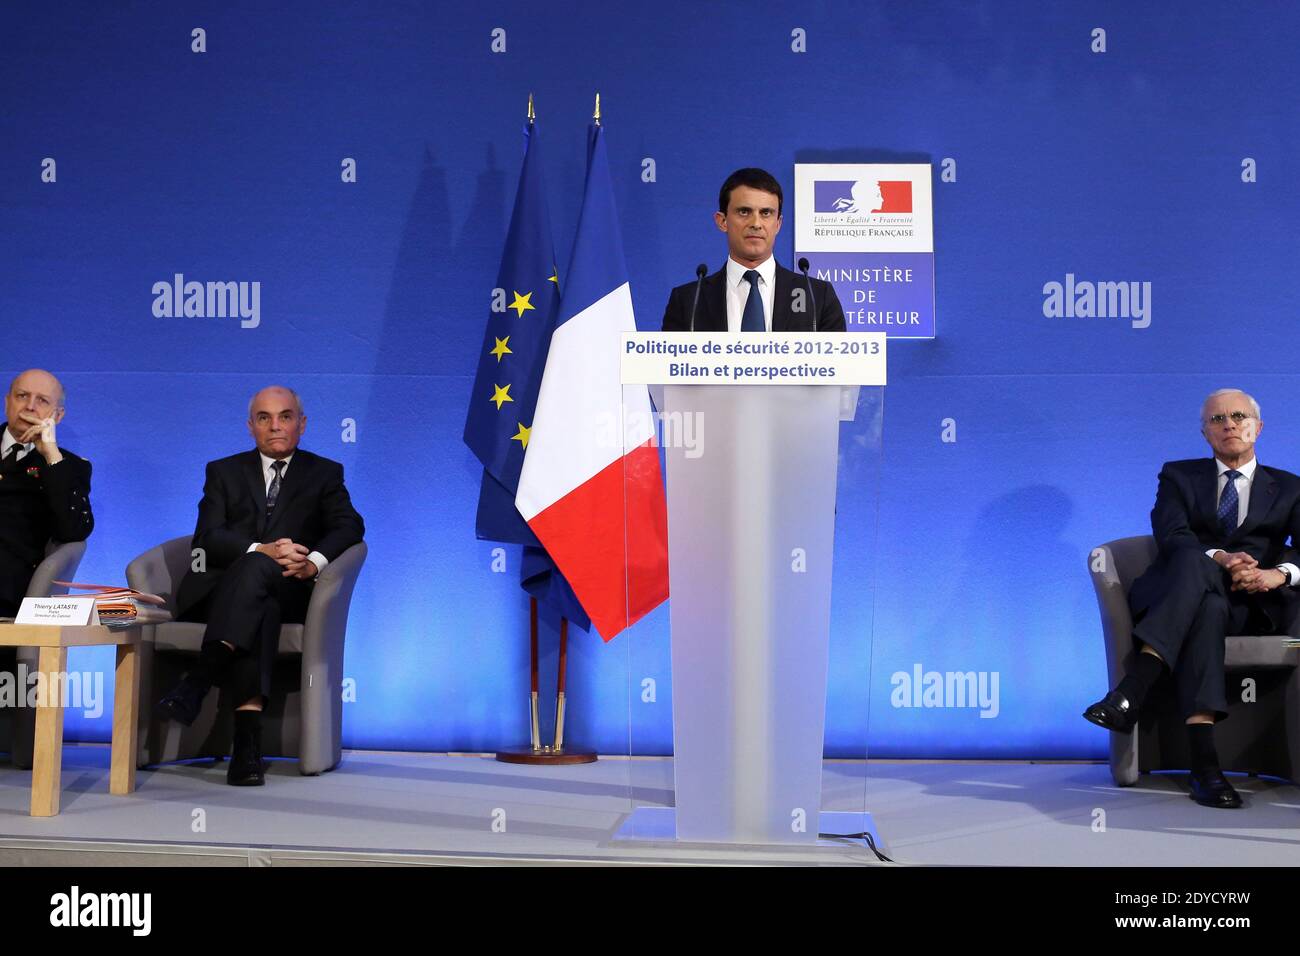 French Interior minister Manuel Valls flanked by Jacques Mignaux general director of the gendarmerie nationale, Thierry Lataste, chief of staff of French Interior minister and Bernard Boucault, Paris police prefect delivers a speech at the ministry in Paris, to present his report of the past year and the prospects of the security policy for the upcoming year, in Paris, France on January 18, 2013 Photo by Stephane Lemouton/ABACAPRESS.COM. Stock Photo